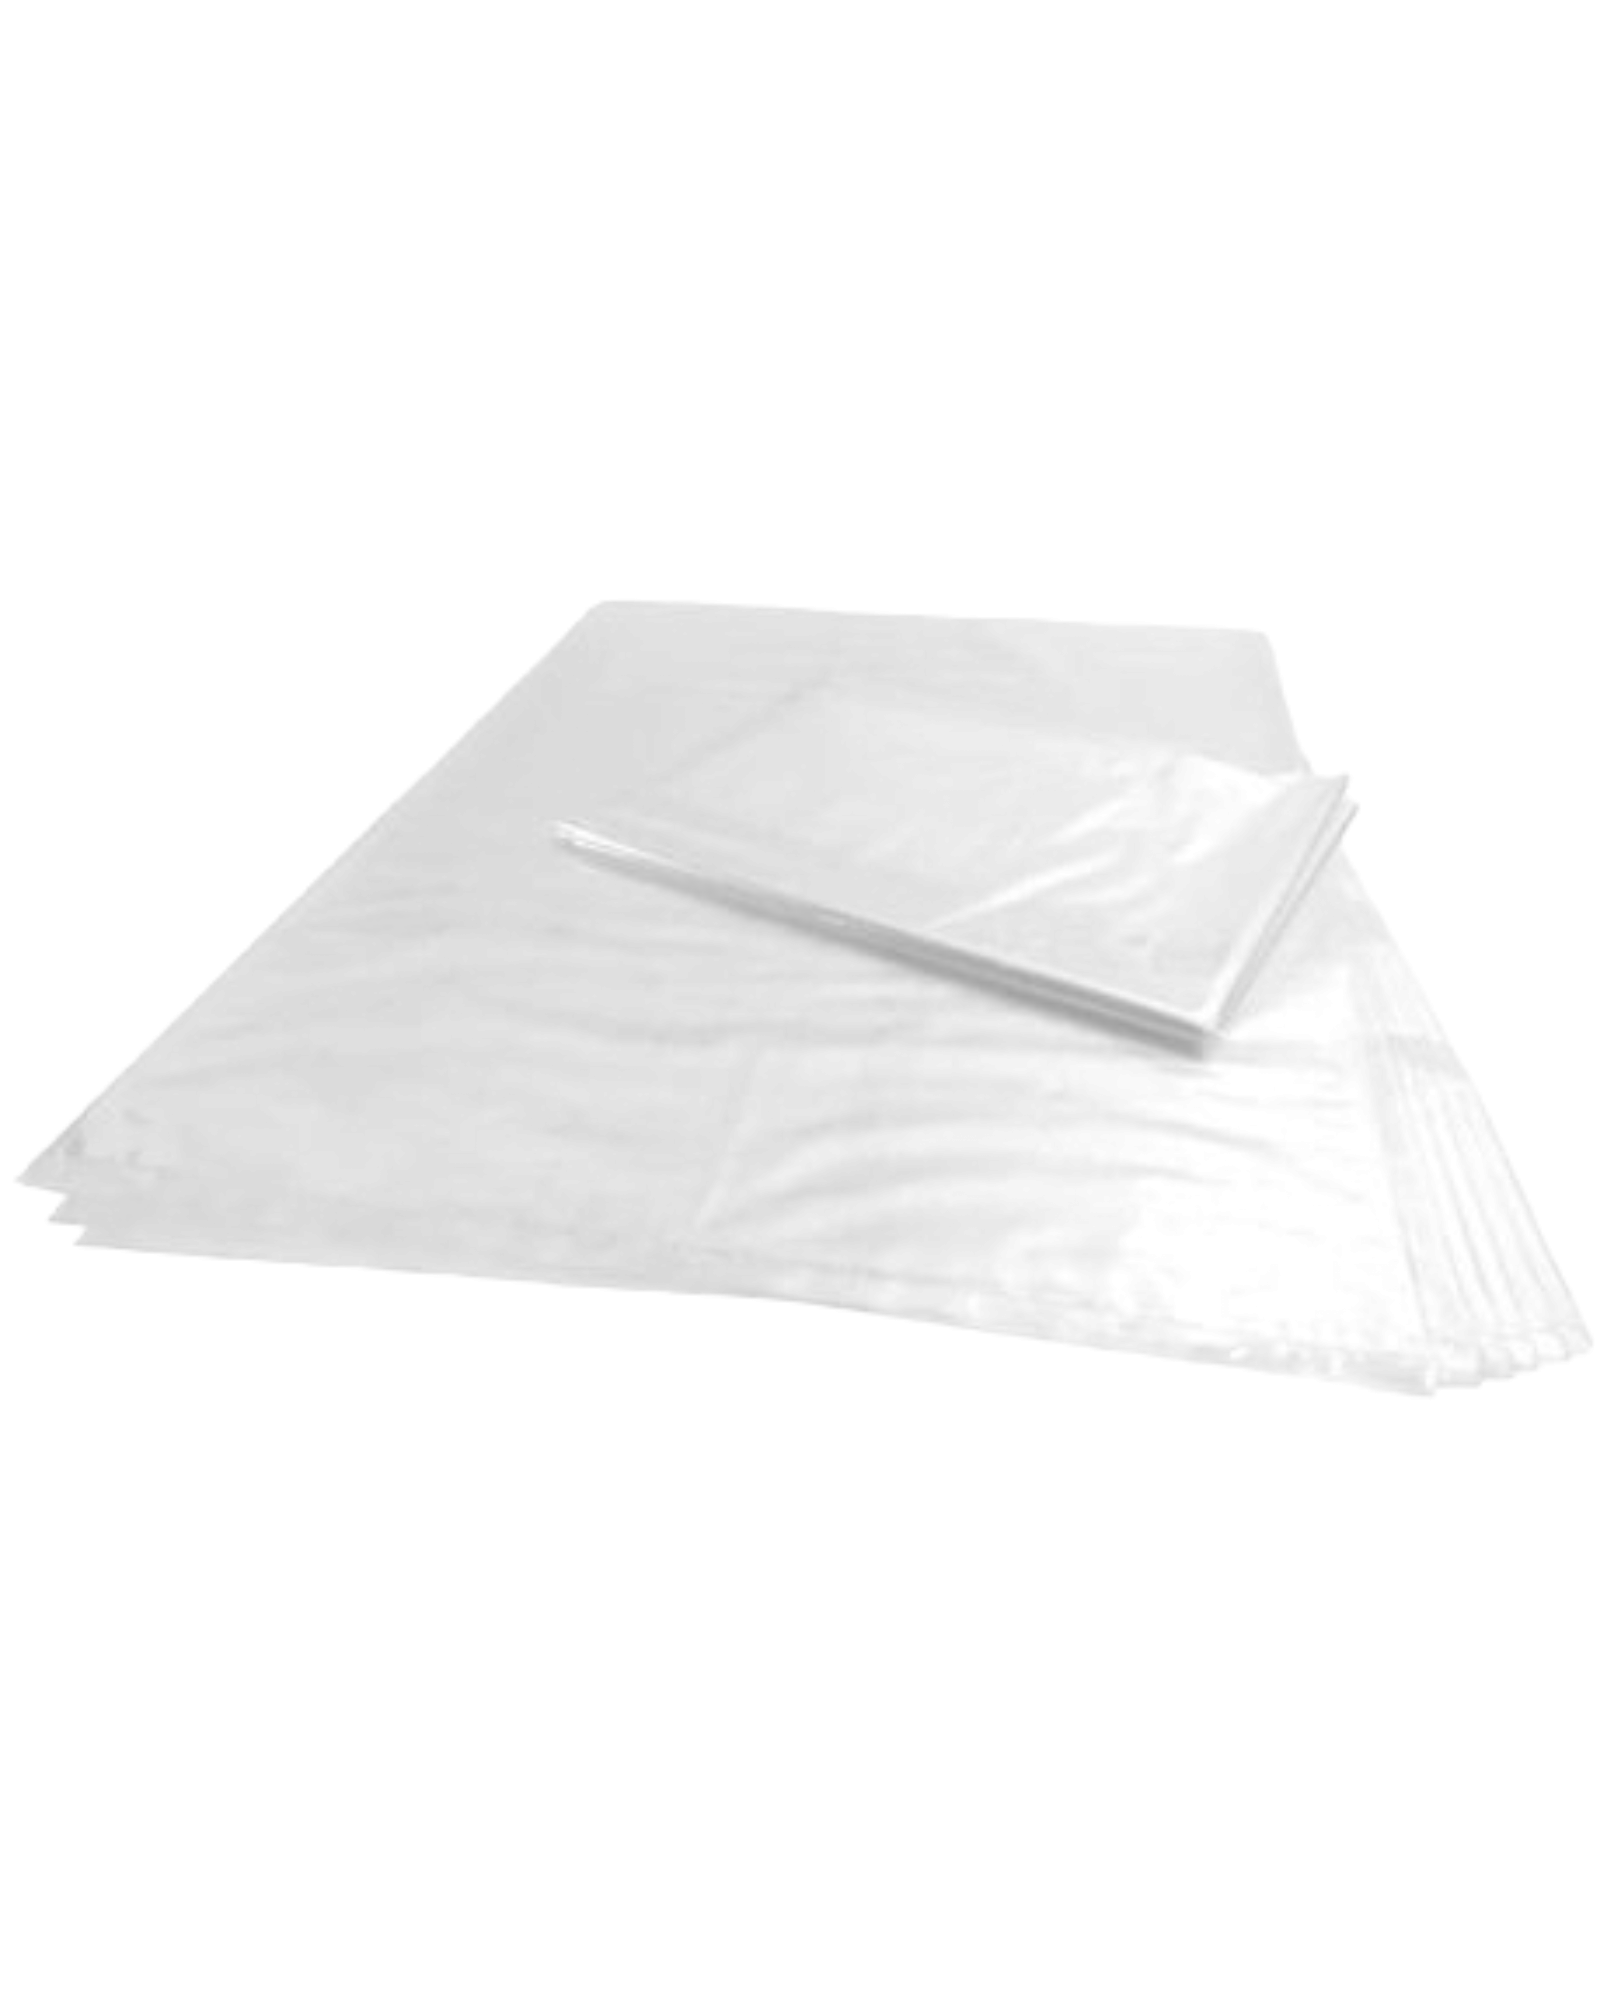 Plastic Butcher Bag 400x650 50microns Clear 100pack